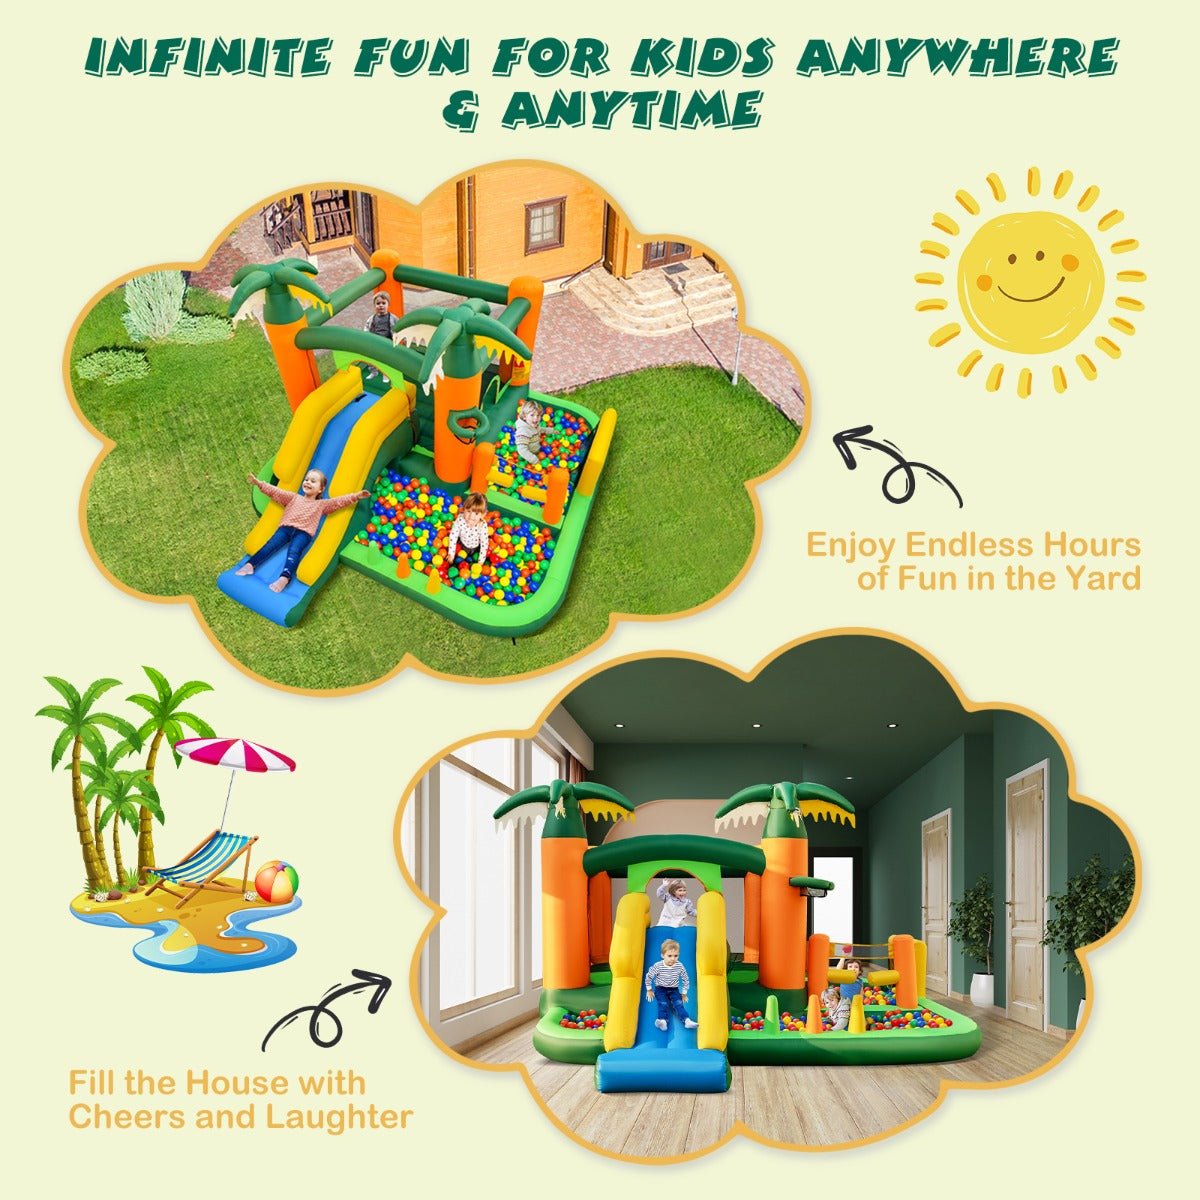 8-in-1 Inflatable Bounce House - Basketball, Ocean Balls, and More!